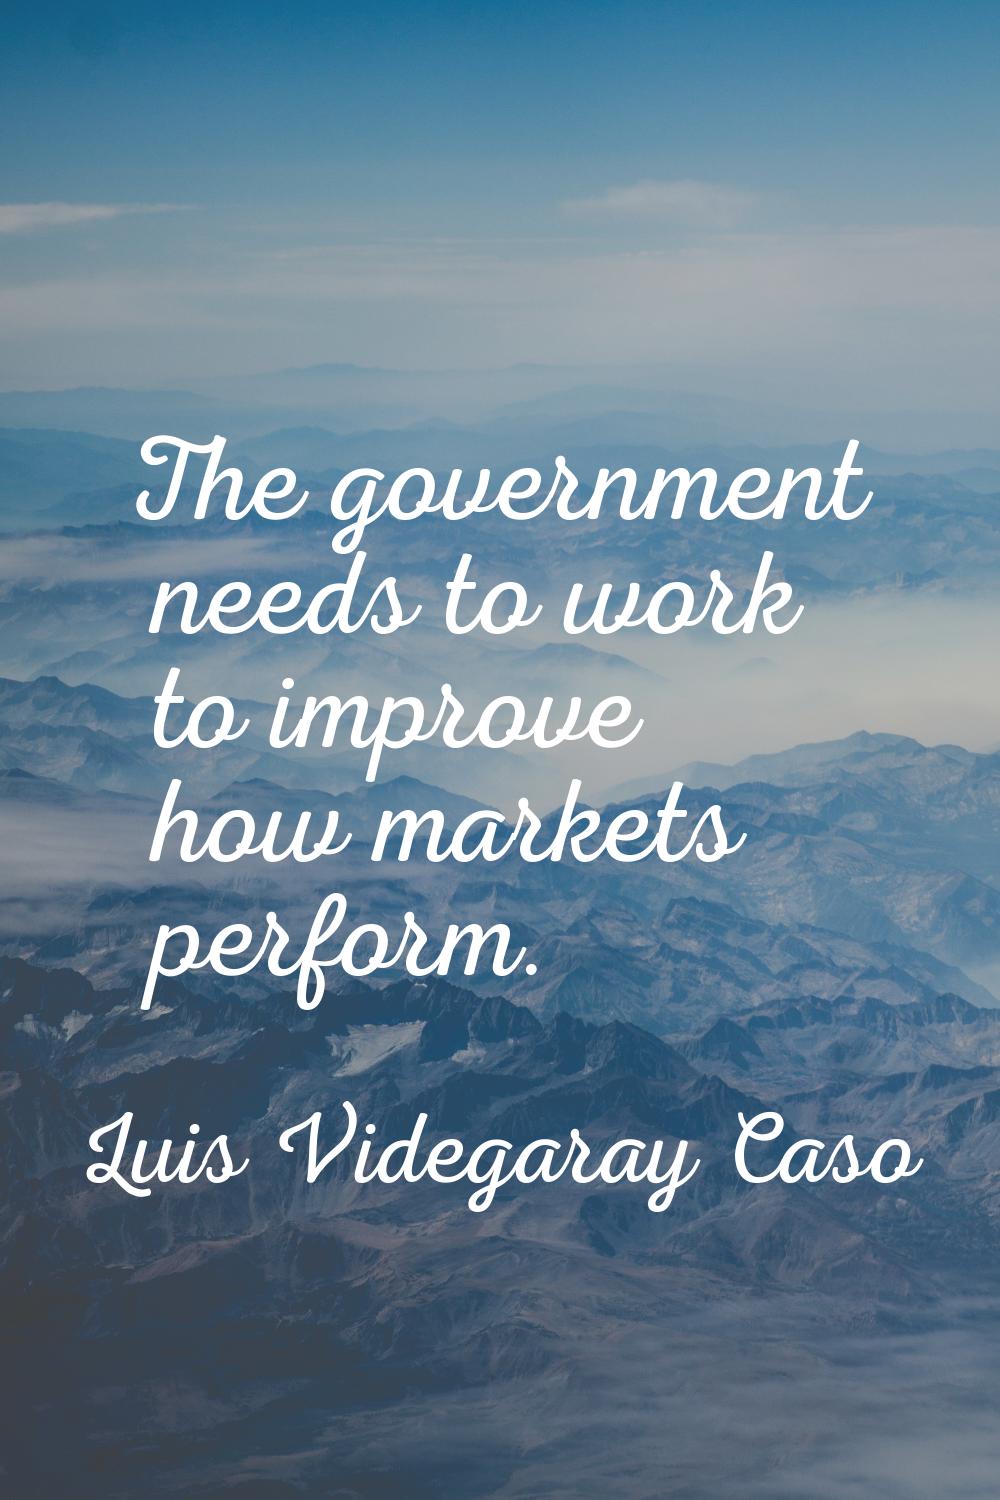 The government needs to work to improve how markets perform.